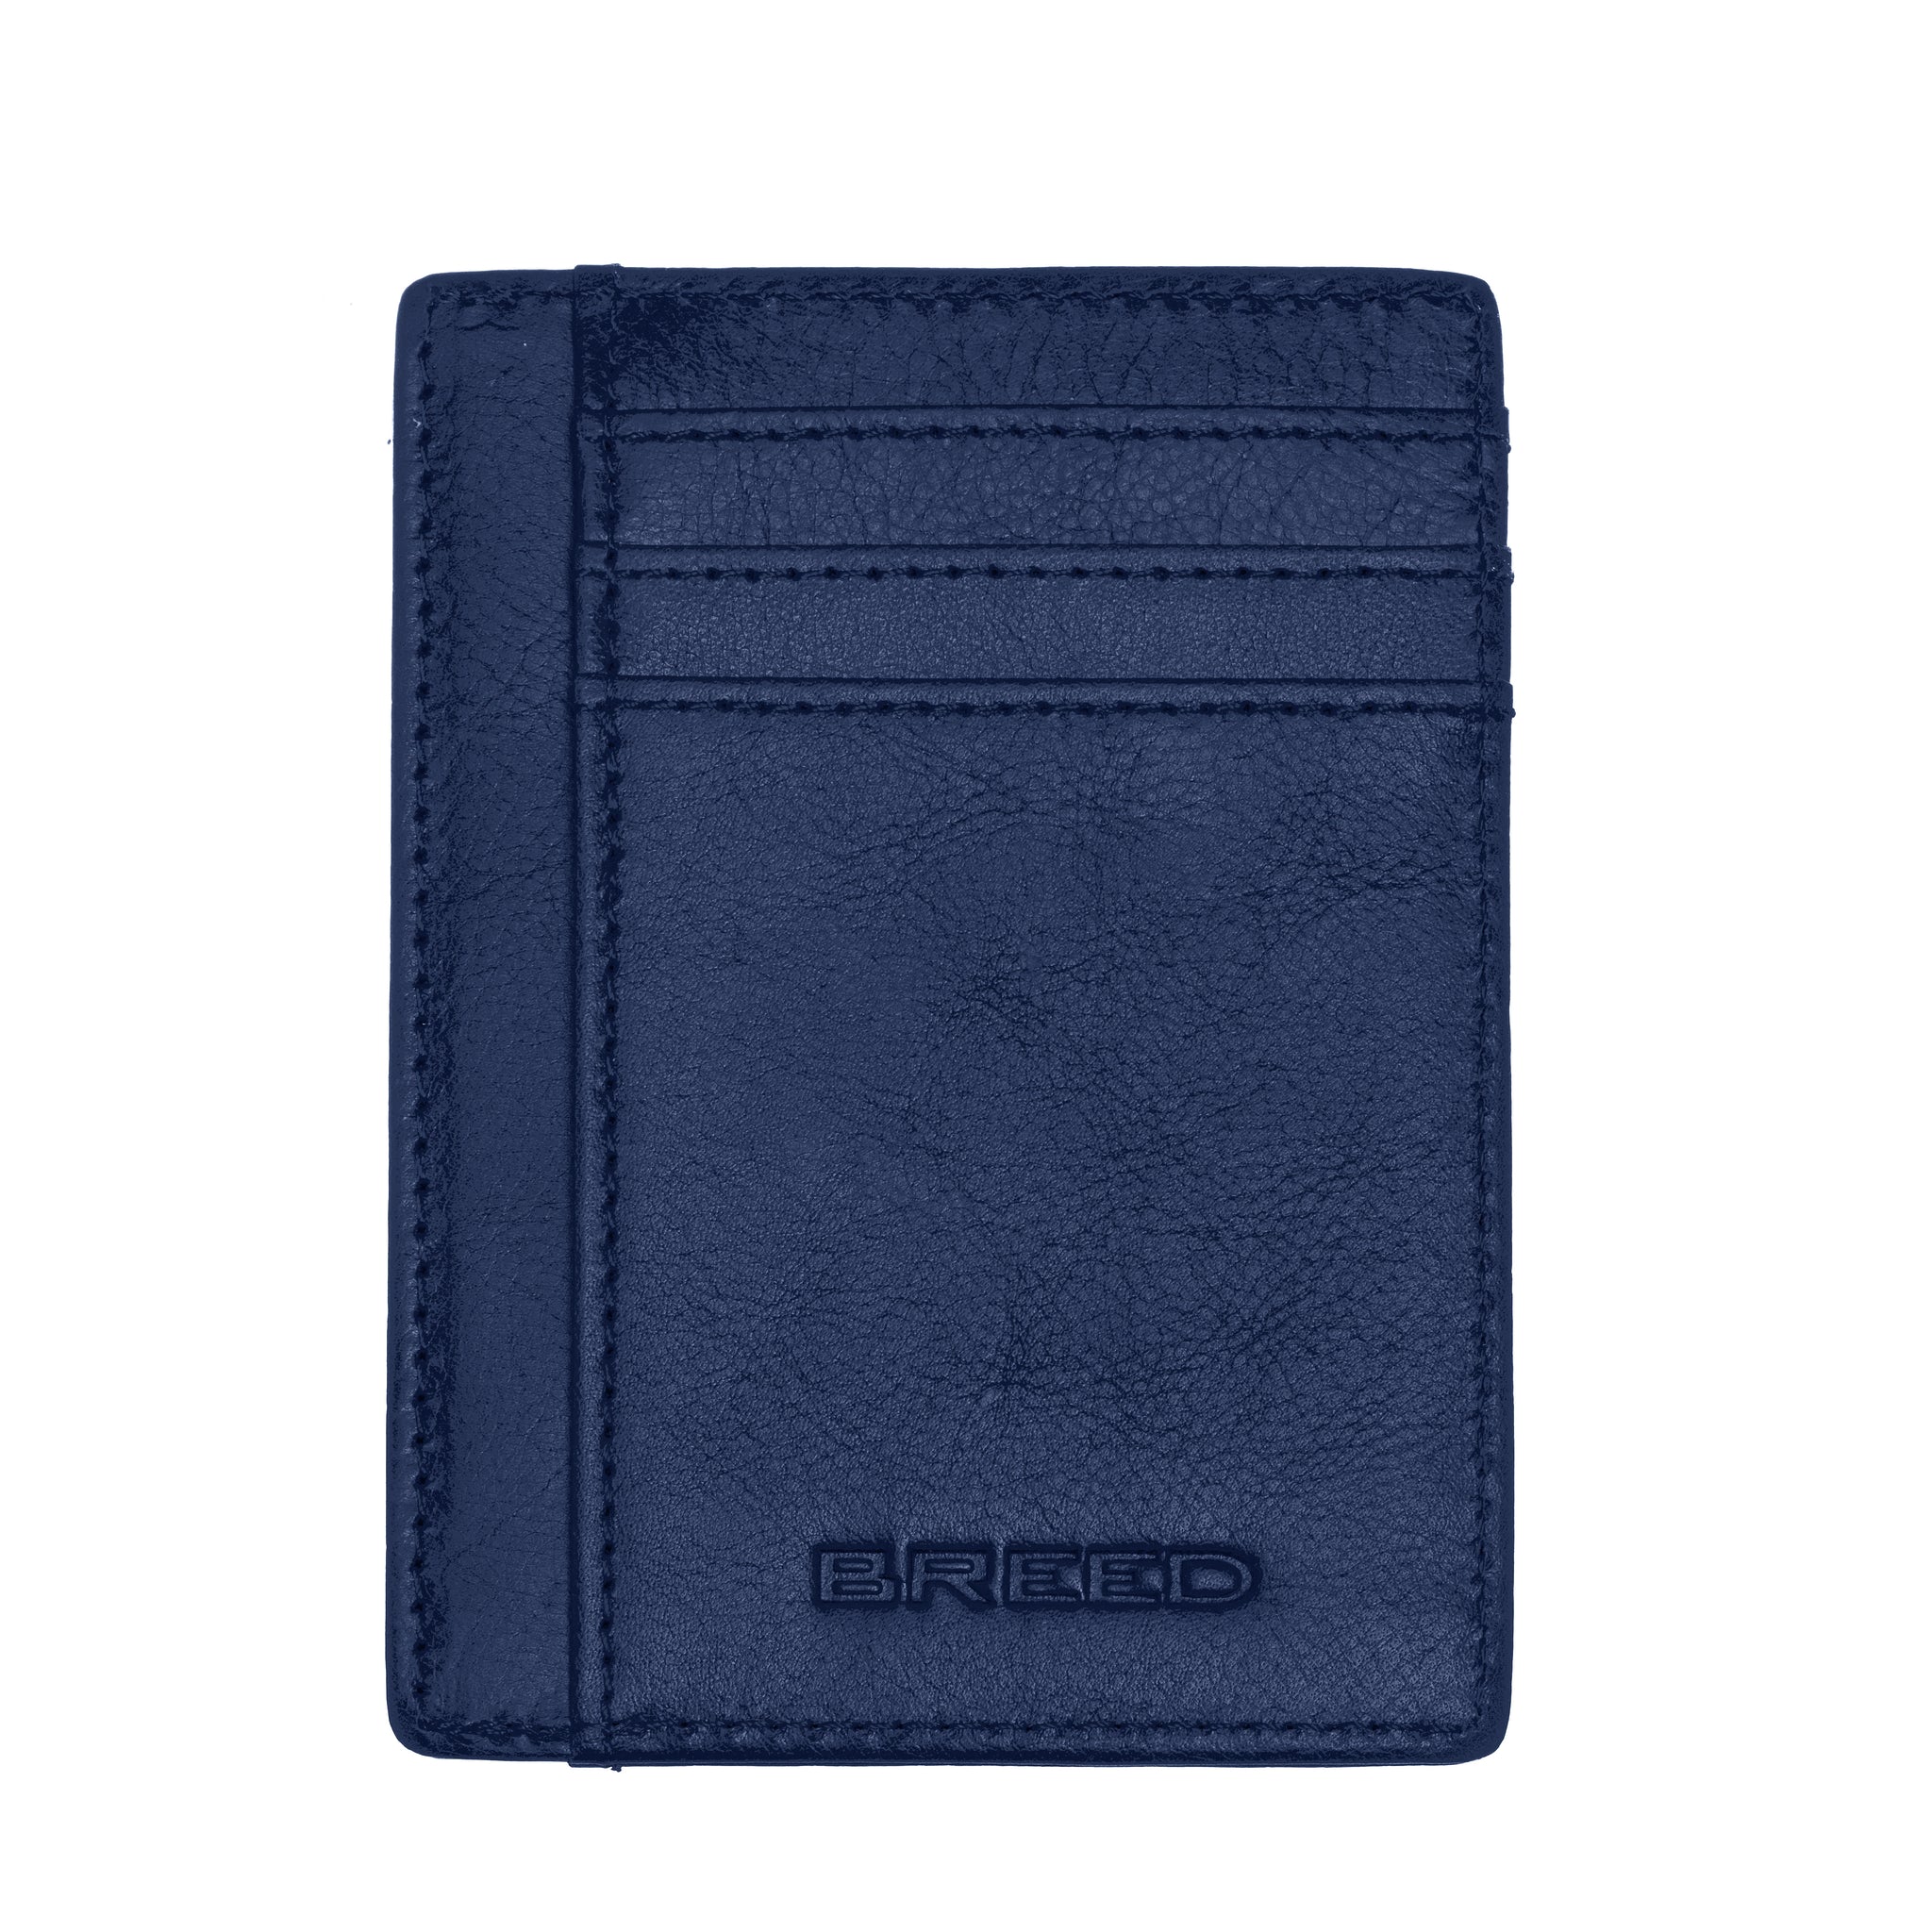 Breed Chase Genuine Leather Front Pocket Wallet - Navy - BRDWALL003-BLU